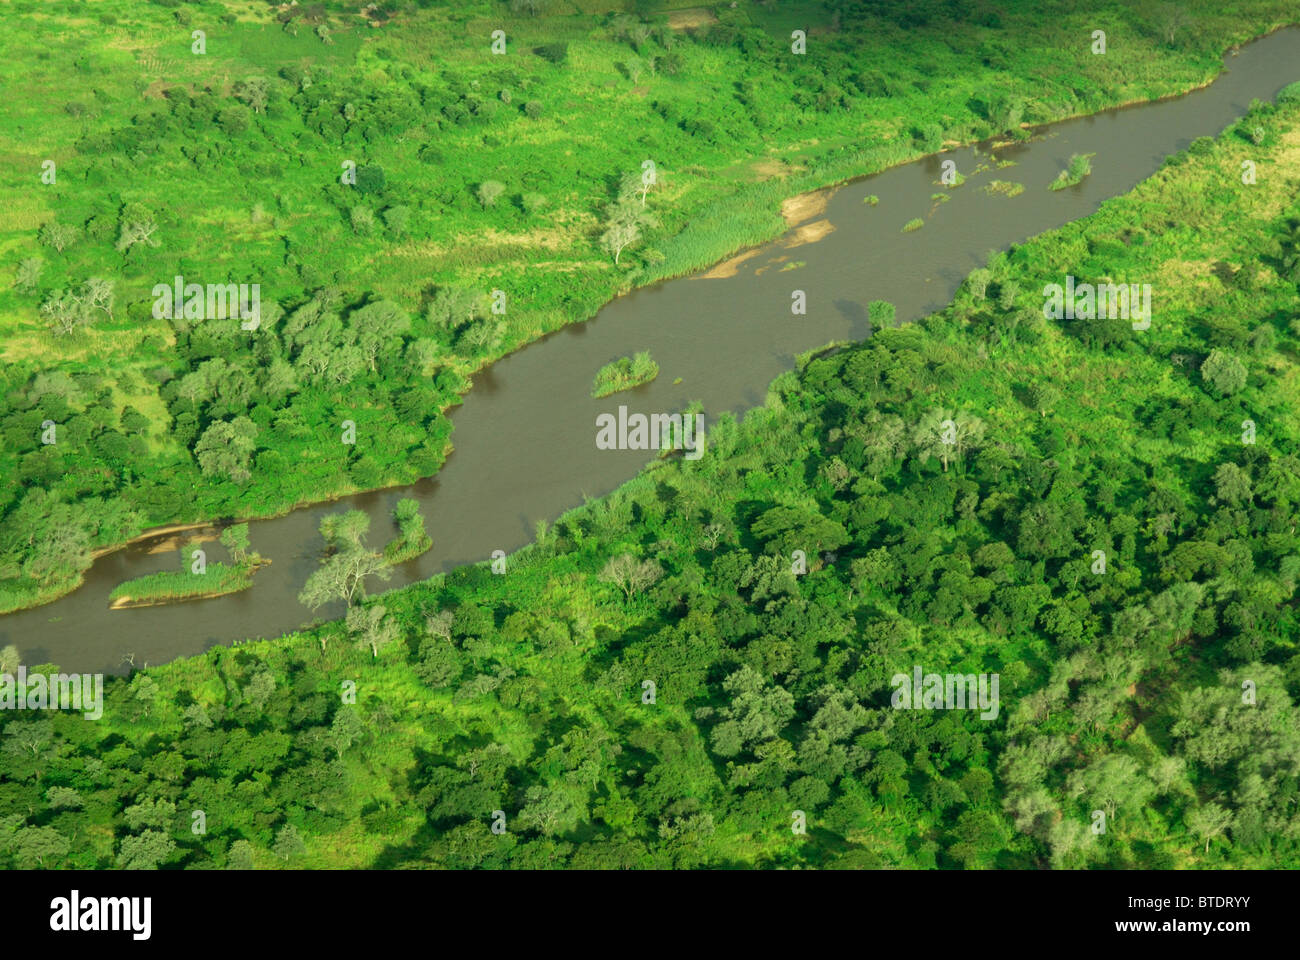 Aerial scenic view of tributary of Luangwa River Stock Photo